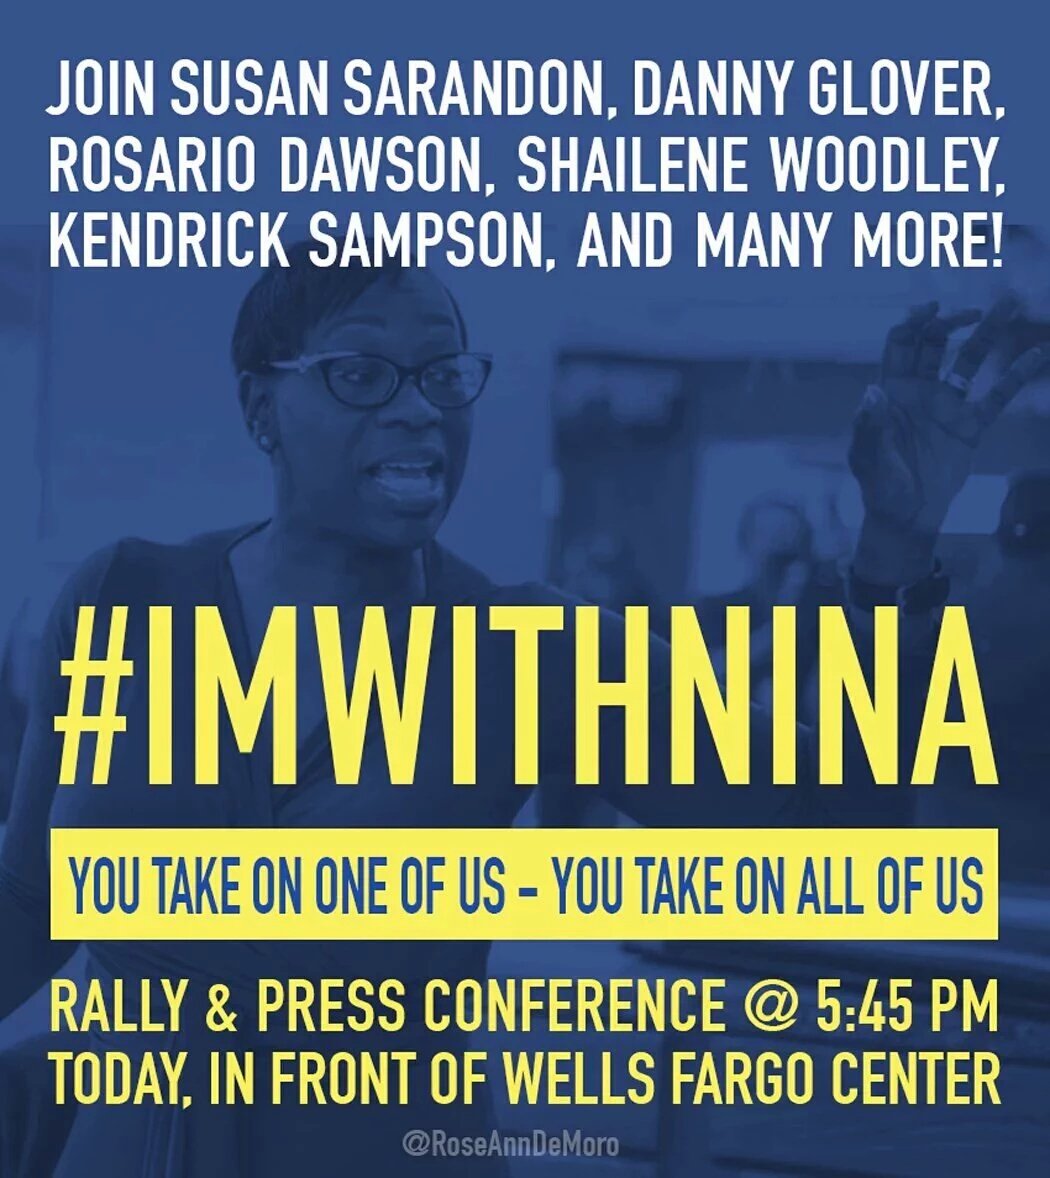 @pdrosenstein Nothing has changed since #DemConvention #DemsInPhilly

You take on ONE OF US - you take on ALL OF US! 
 #ImWithNina